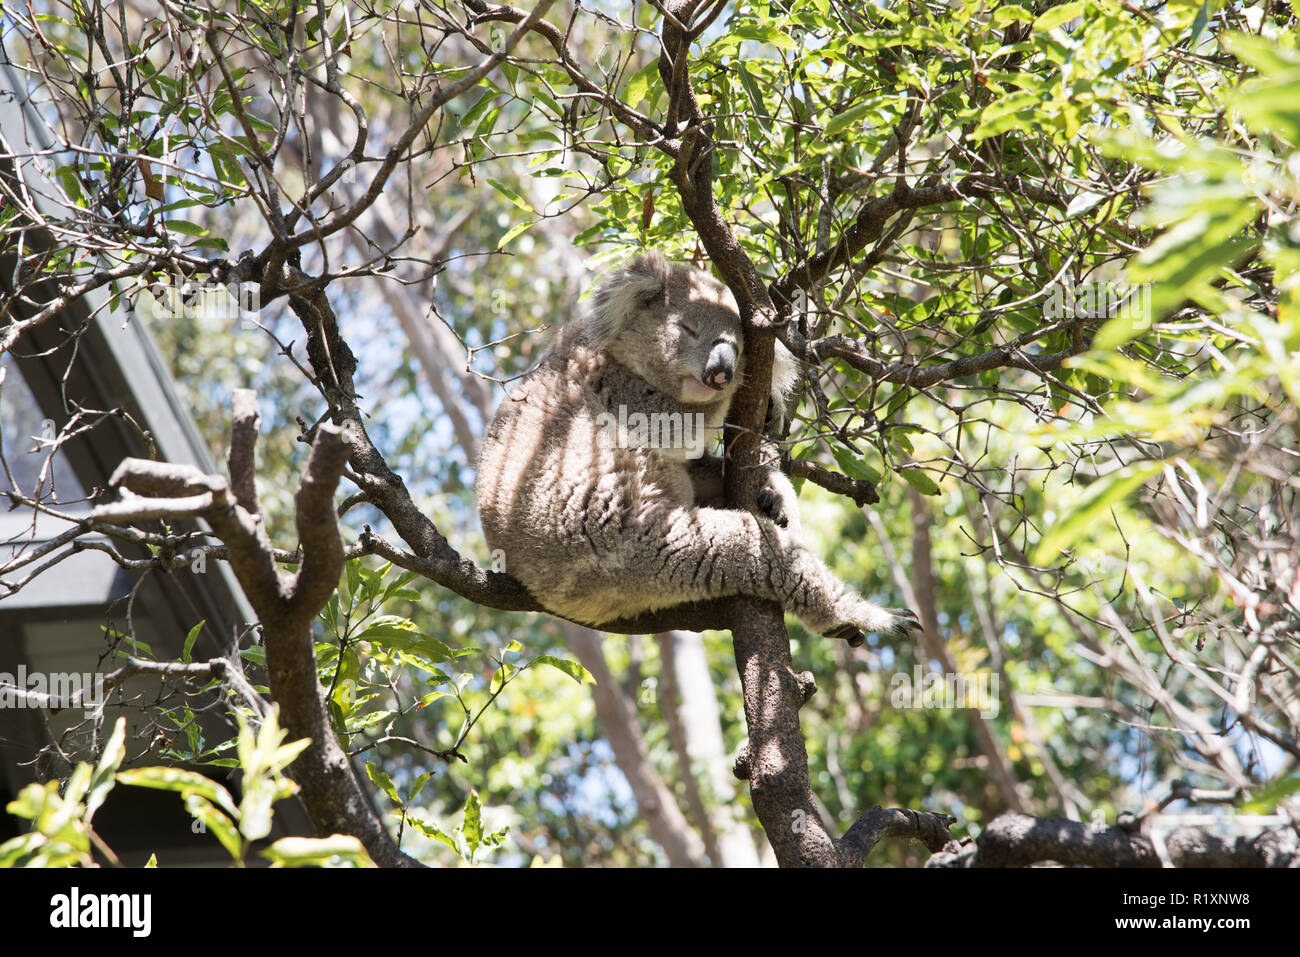 Koala perched on branch in leafy tree on a sunny day in Sydney, Australia Stock Photo